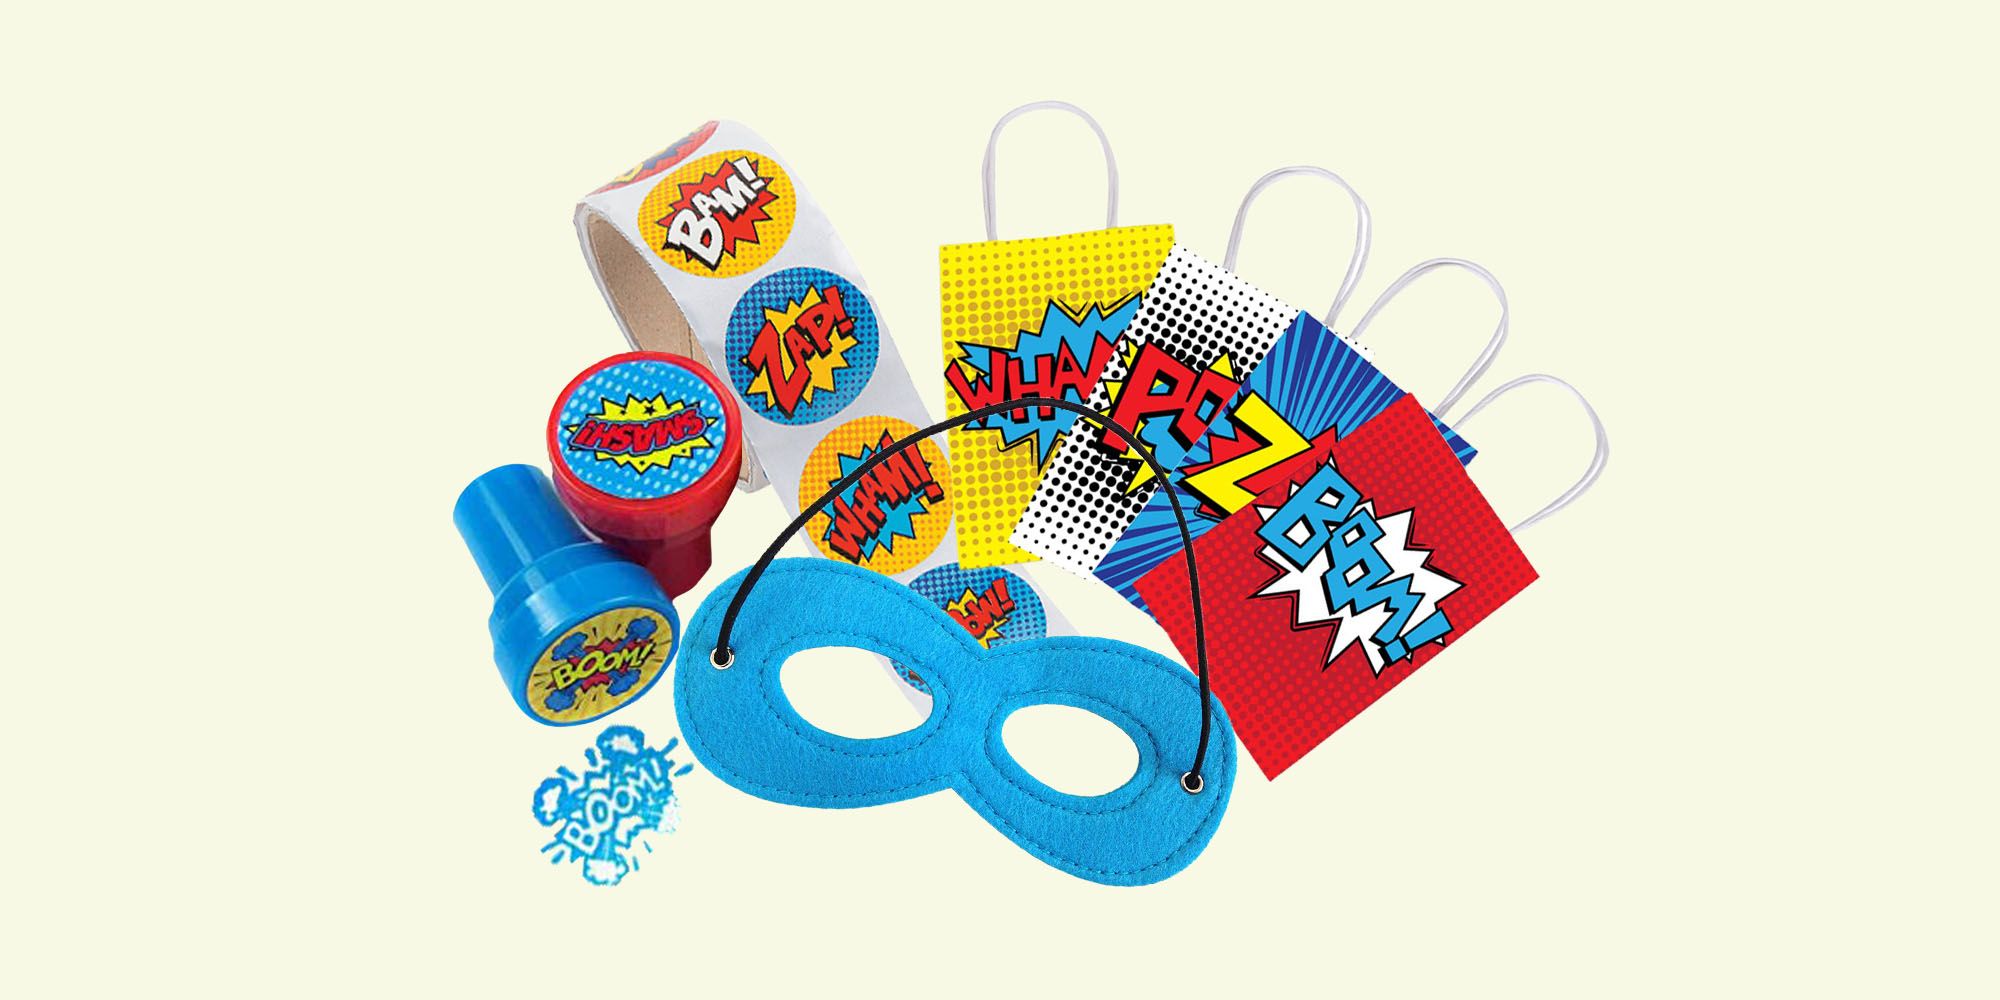 goodie bag items for kids